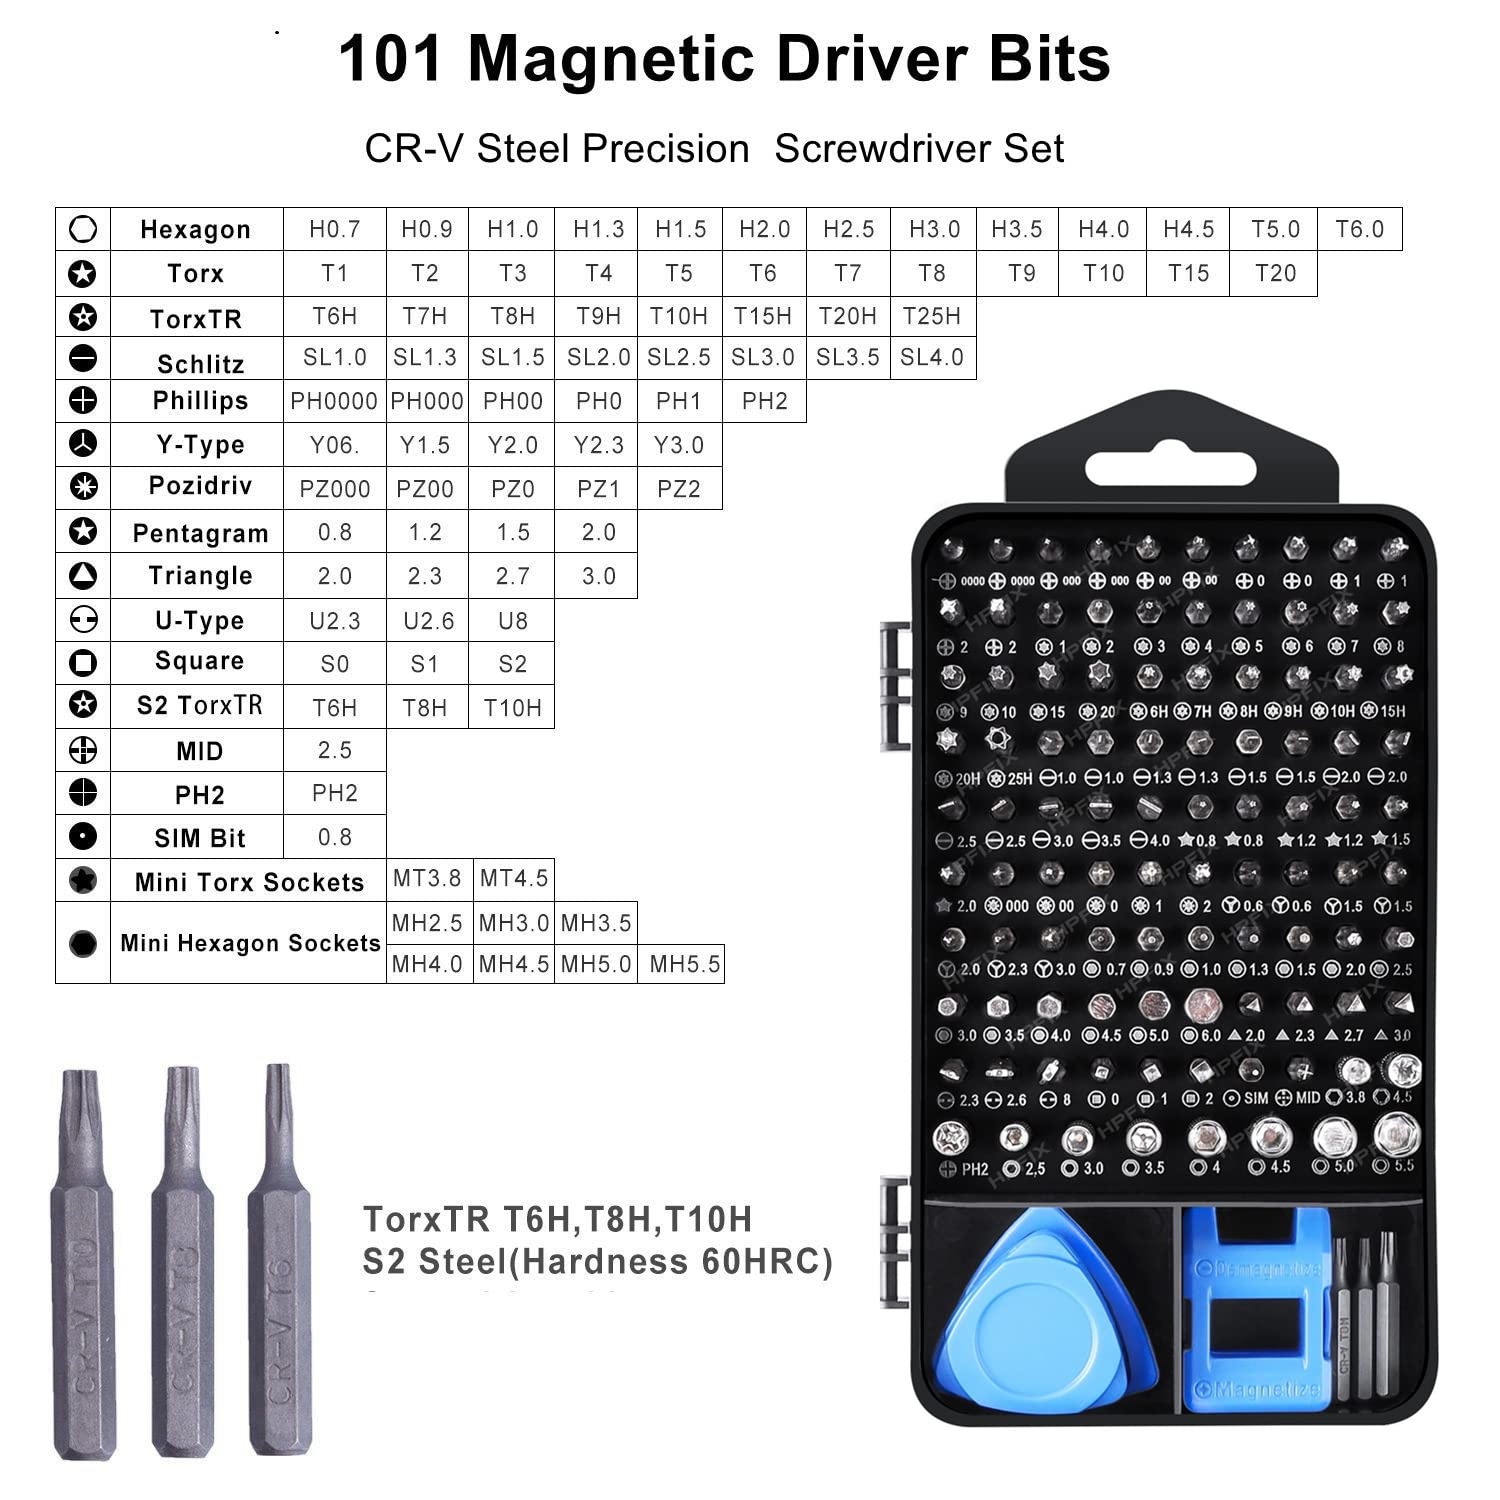 HPFIX Precision Screwdriver Sets 124-Piece Computer Tool Kit with 101 Bits Magnetic, Electronics Repair Tool Kit for iPhone, MacBook, Laptop, PC, Tablet, PS4, Xbox, Nintendo, Game Console